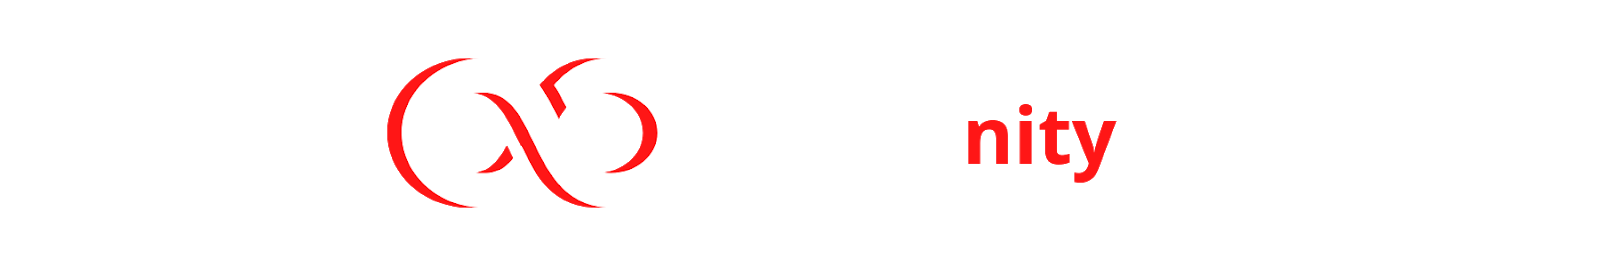 Inphynity-old